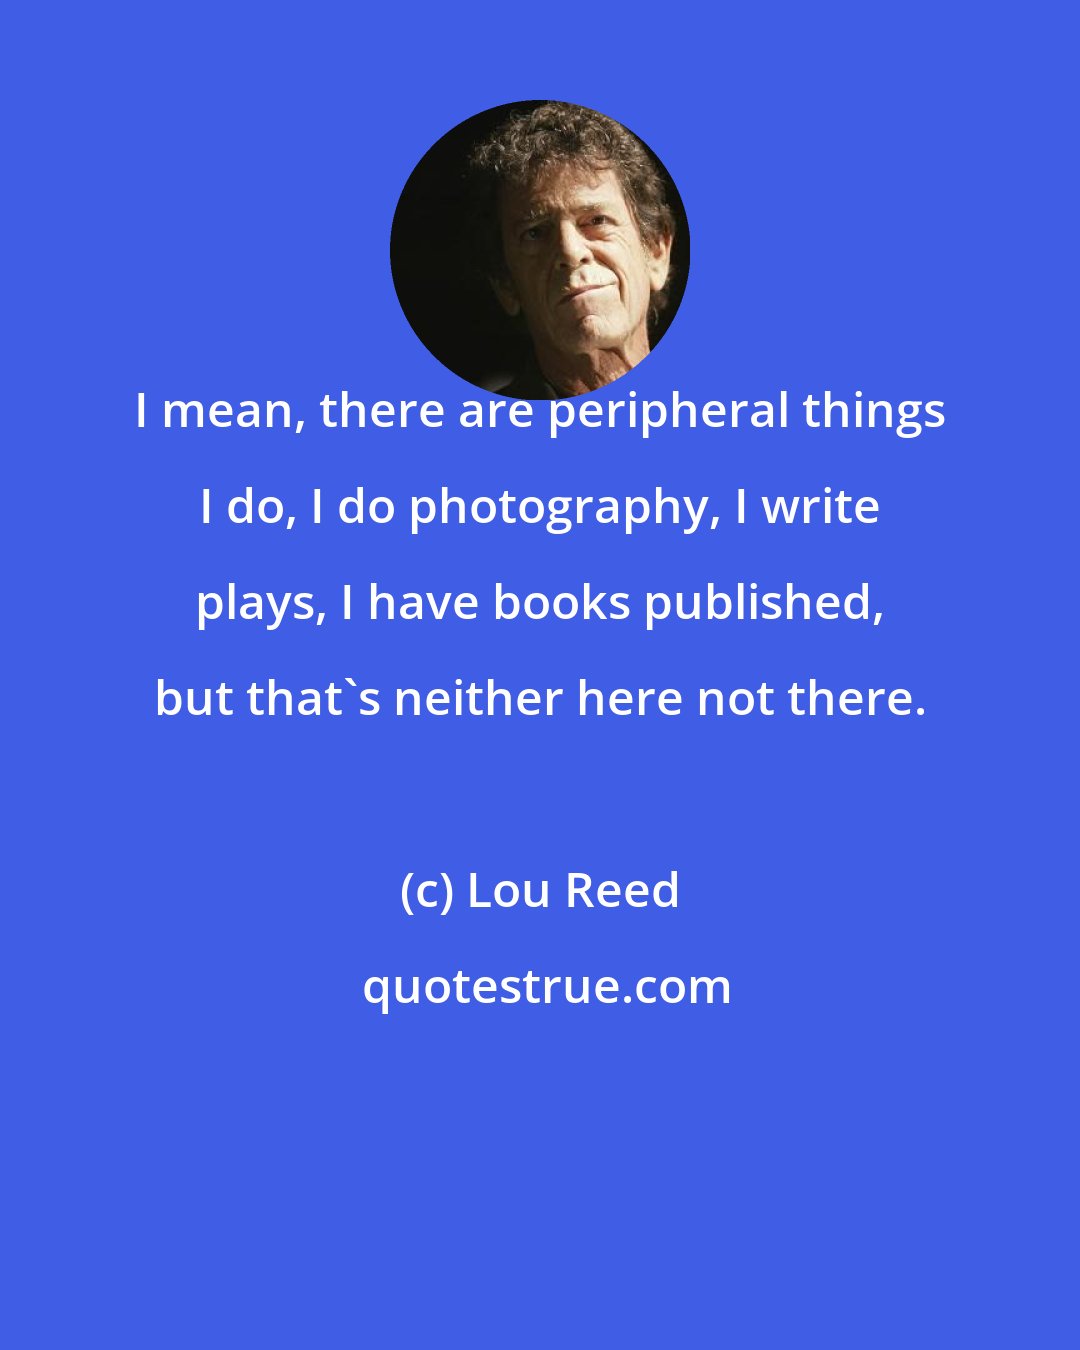 Lou Reed: I mean, there are peripheral things I do, I do photography, I write plays, I have books published, but that's neither here not there.